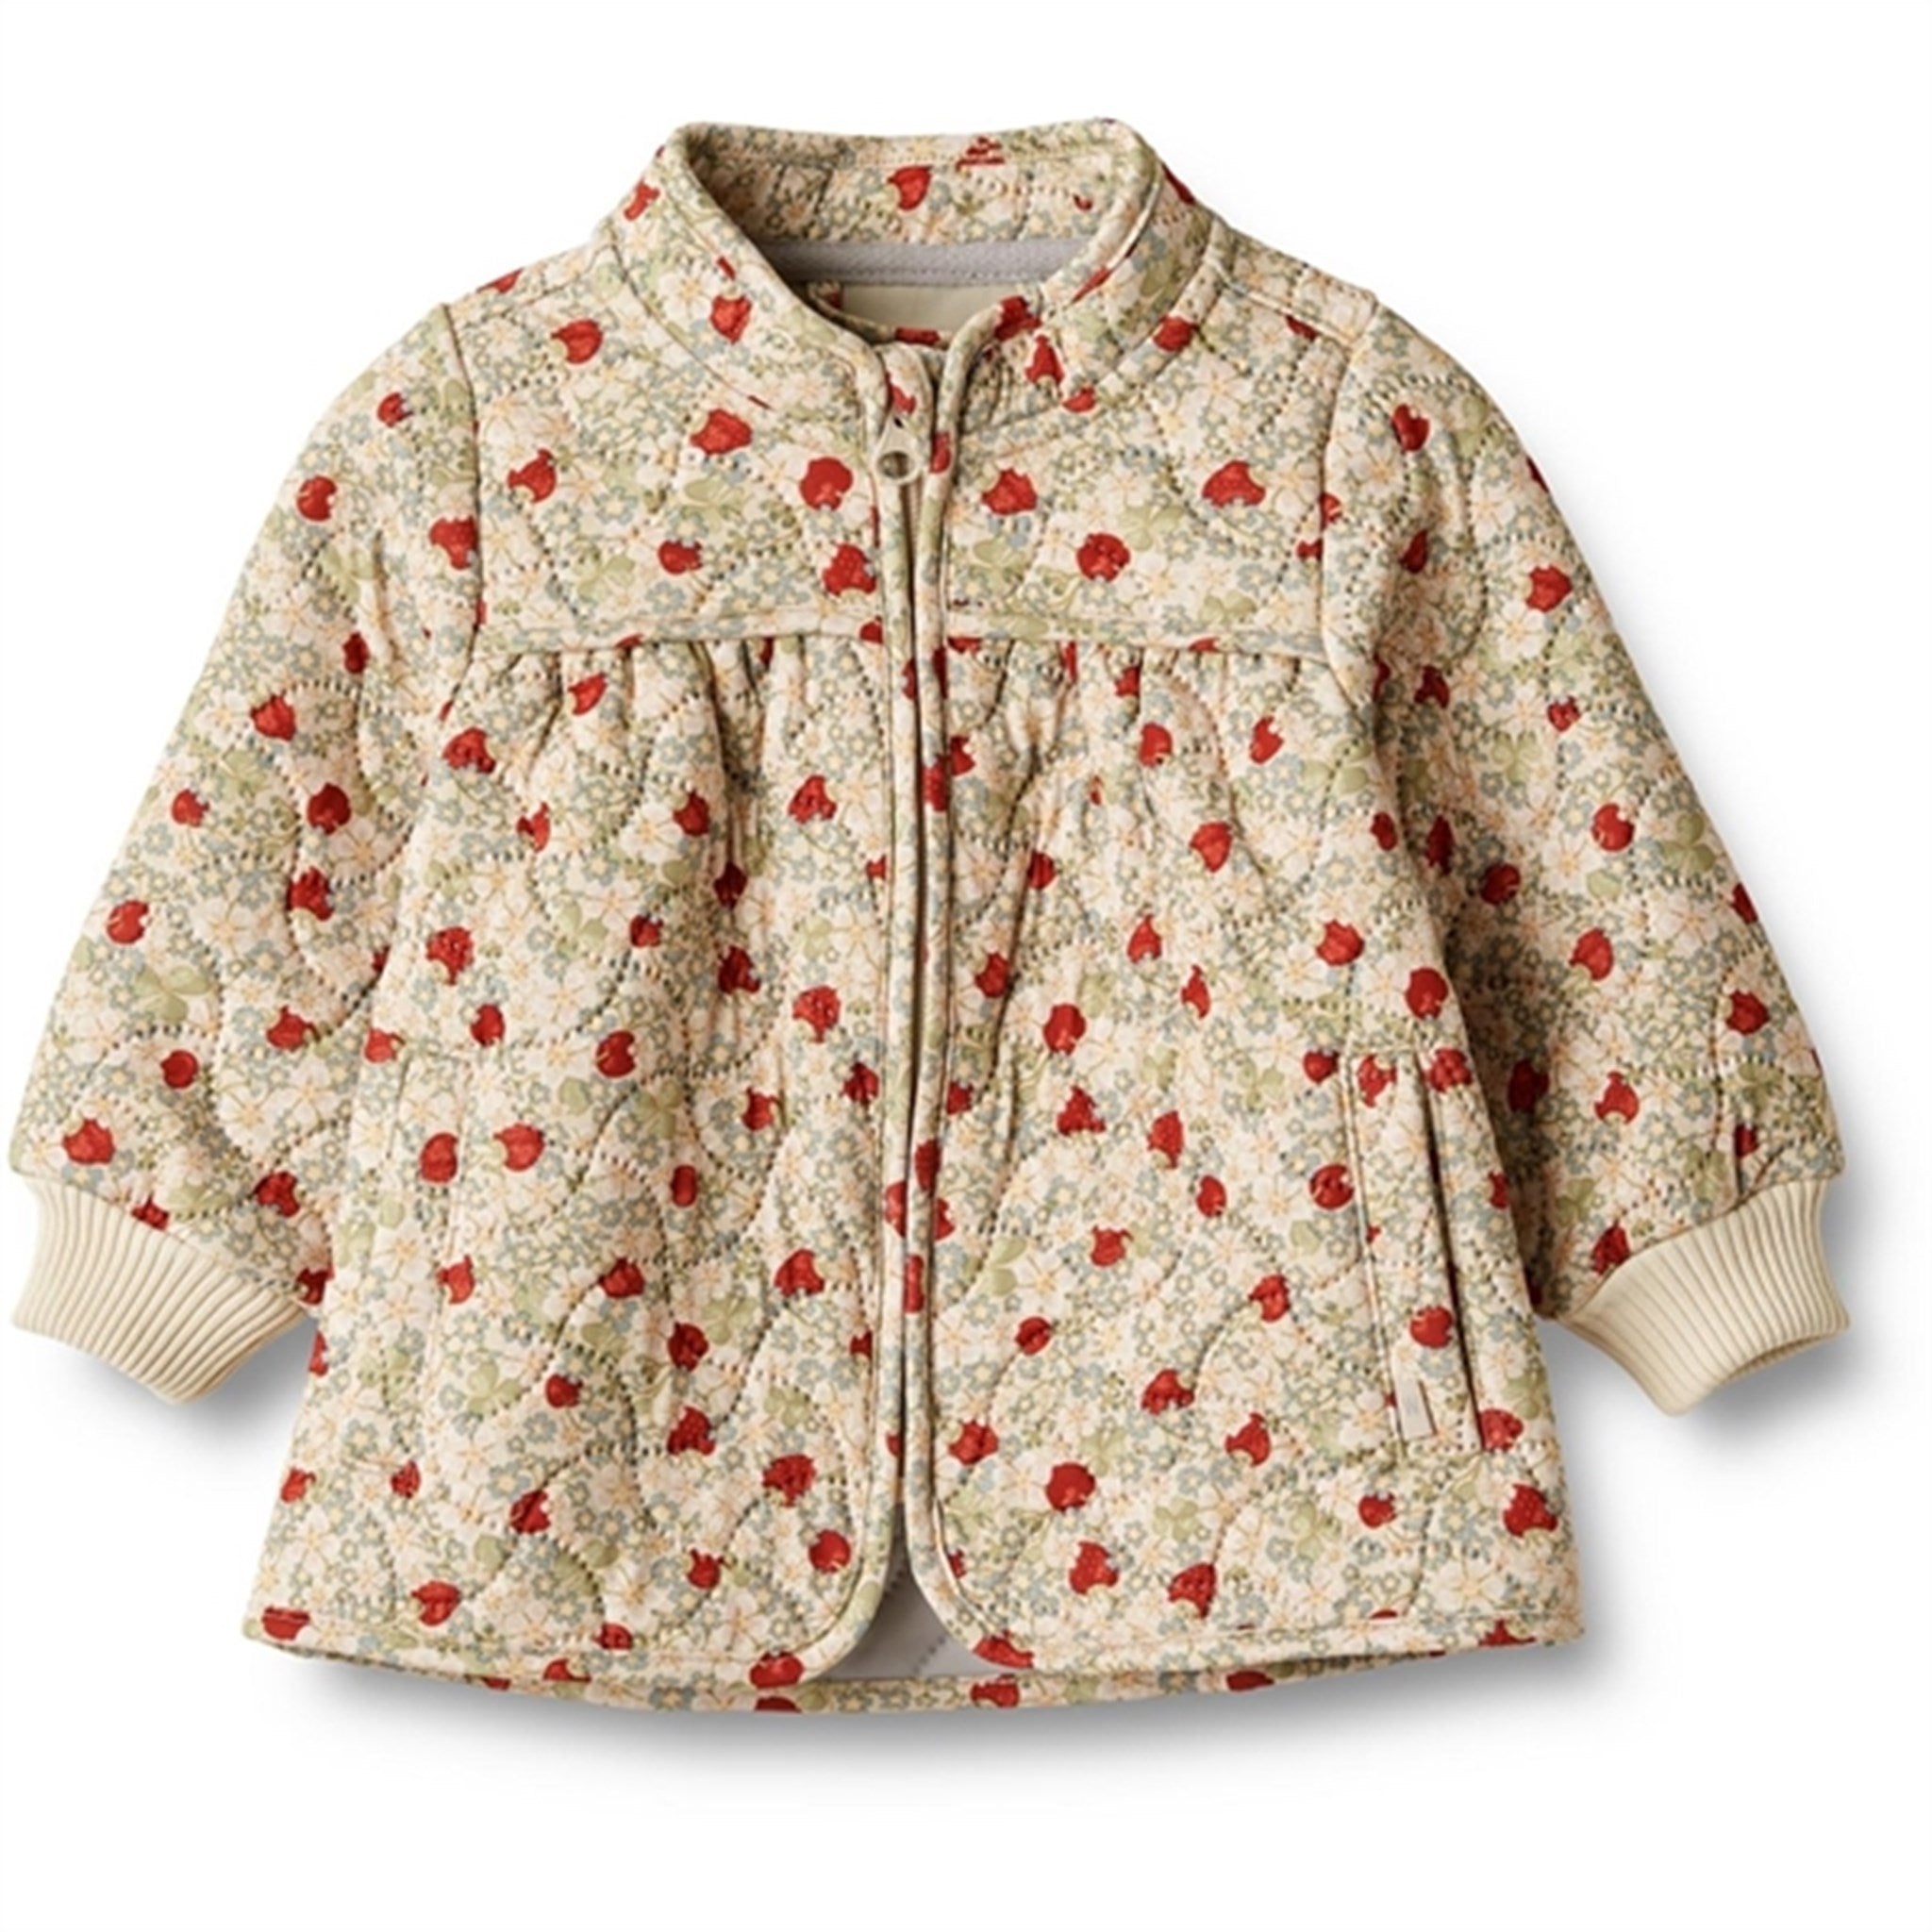 Wheat Thermo Strawberry Jacket Thilde